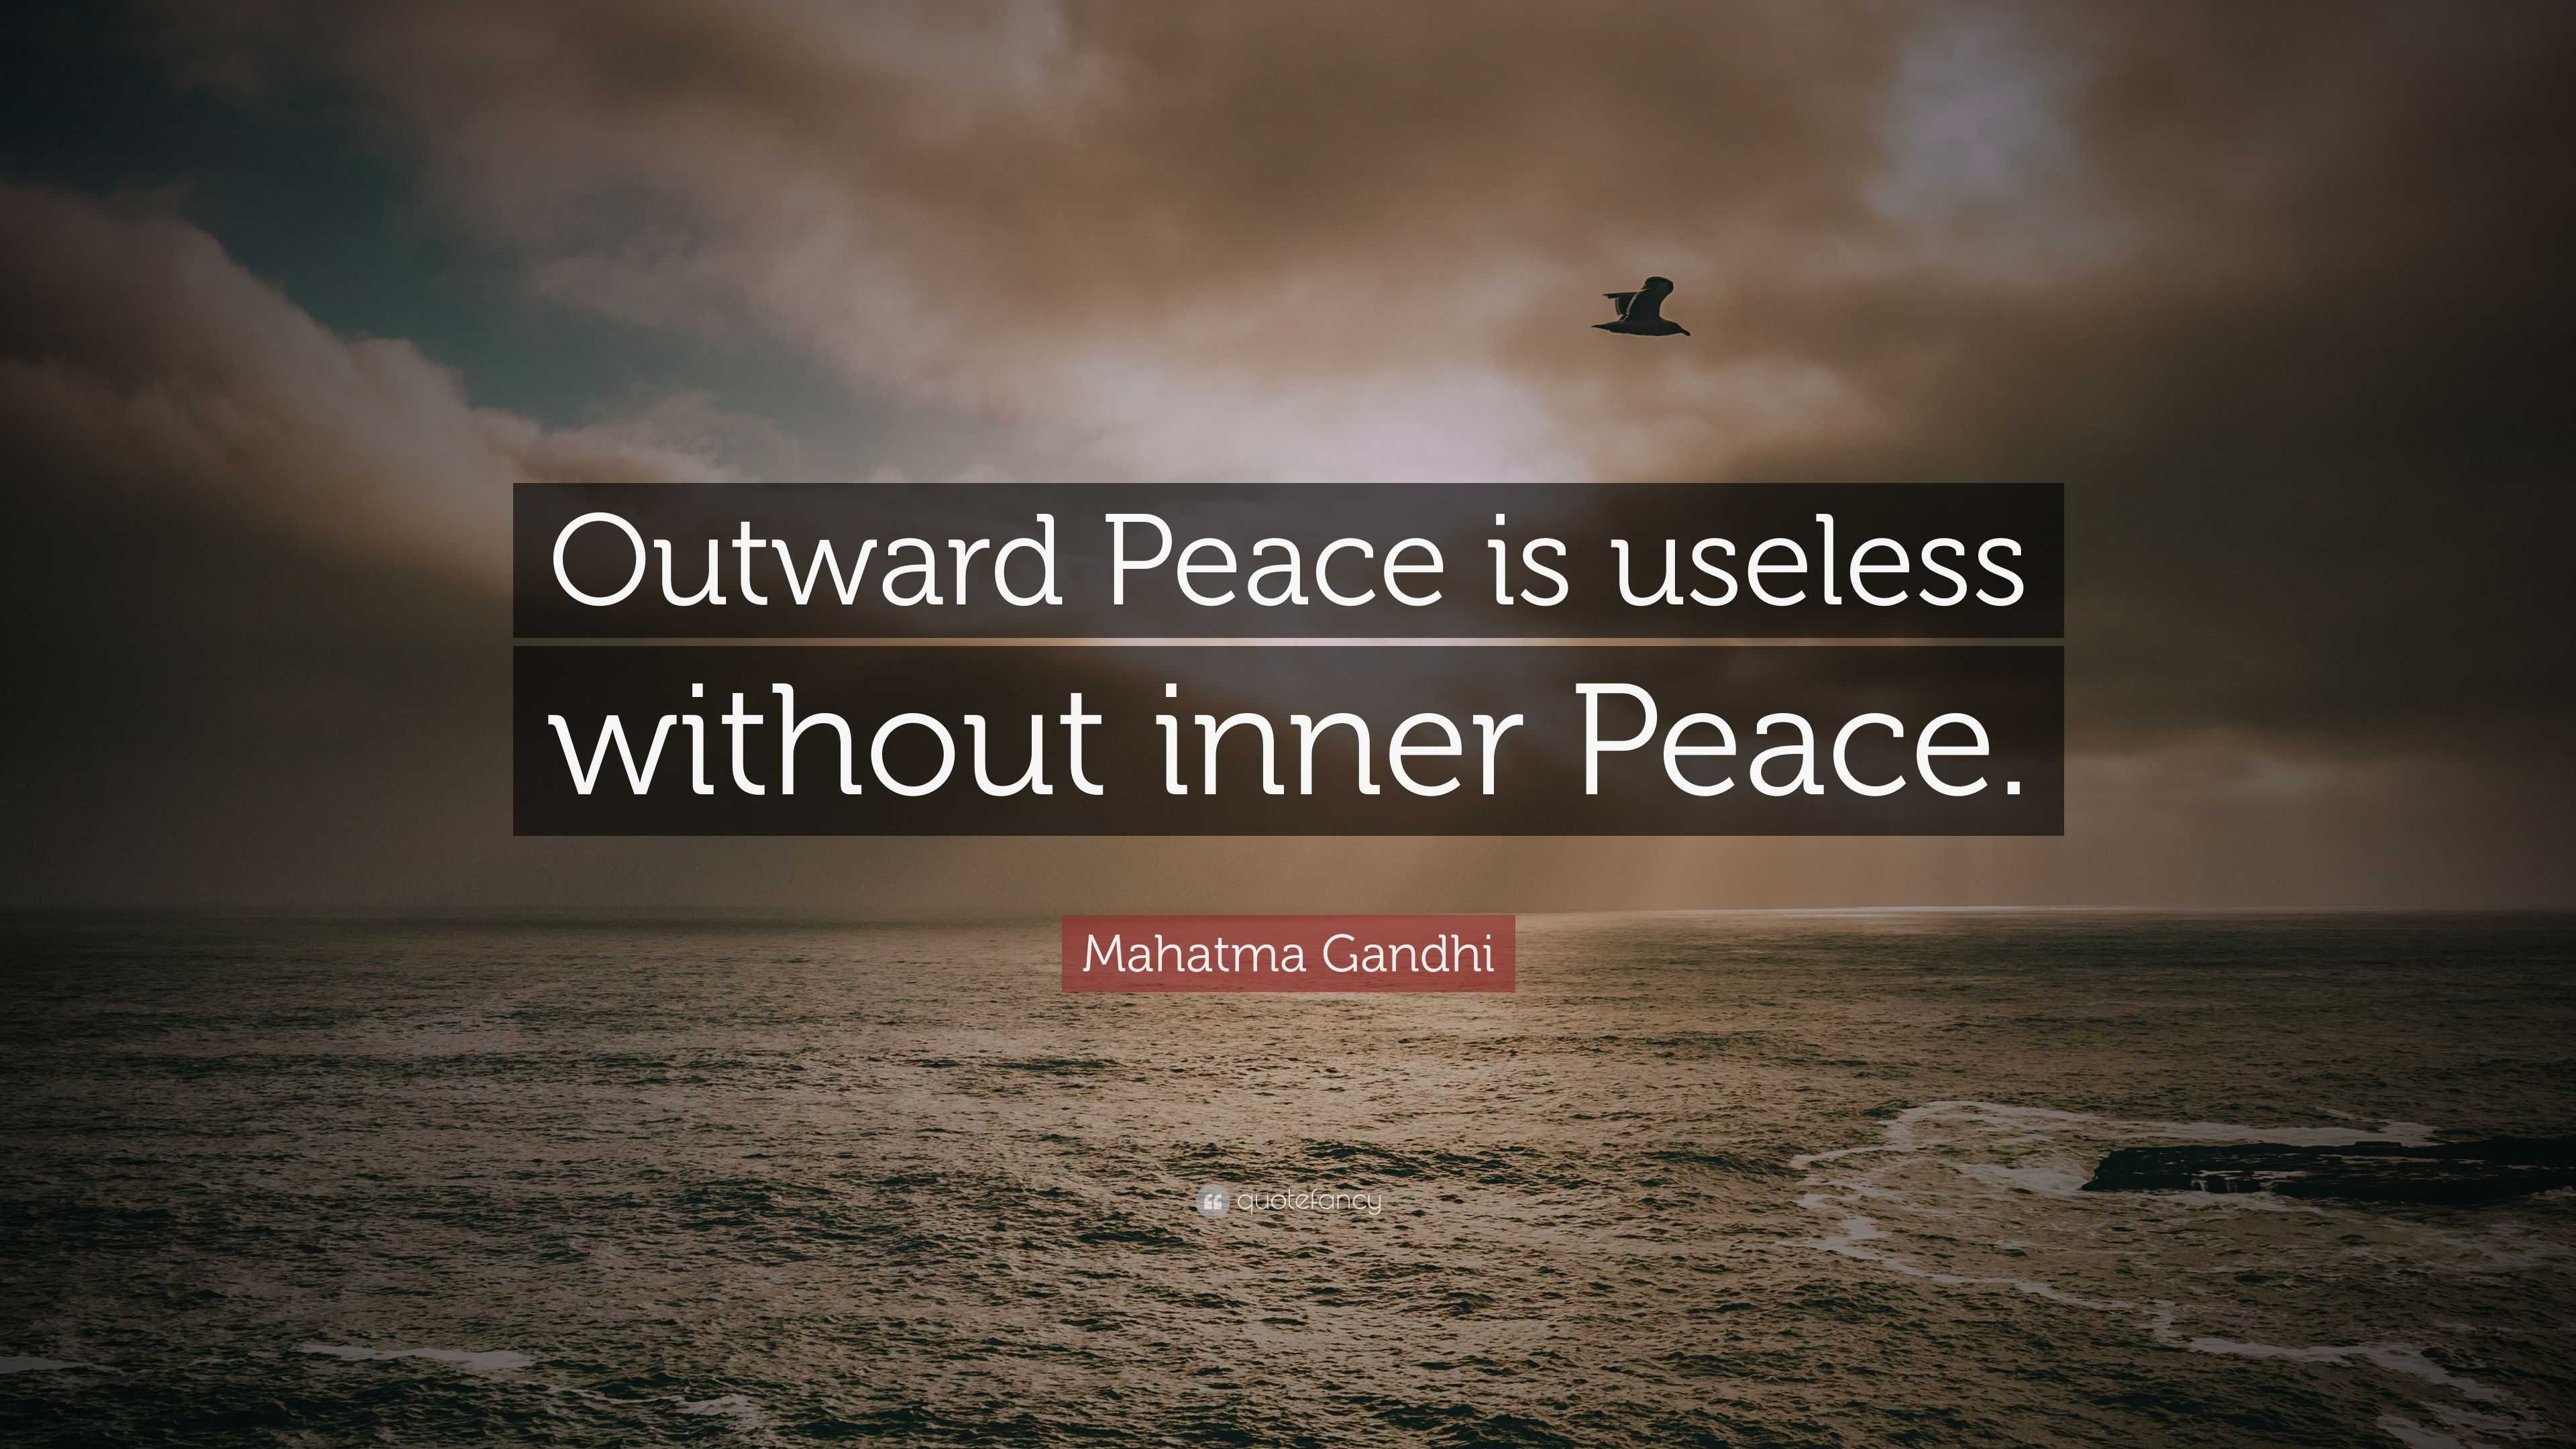 Mahatma Gandhi Quote: "Outward Peace is useless without ...